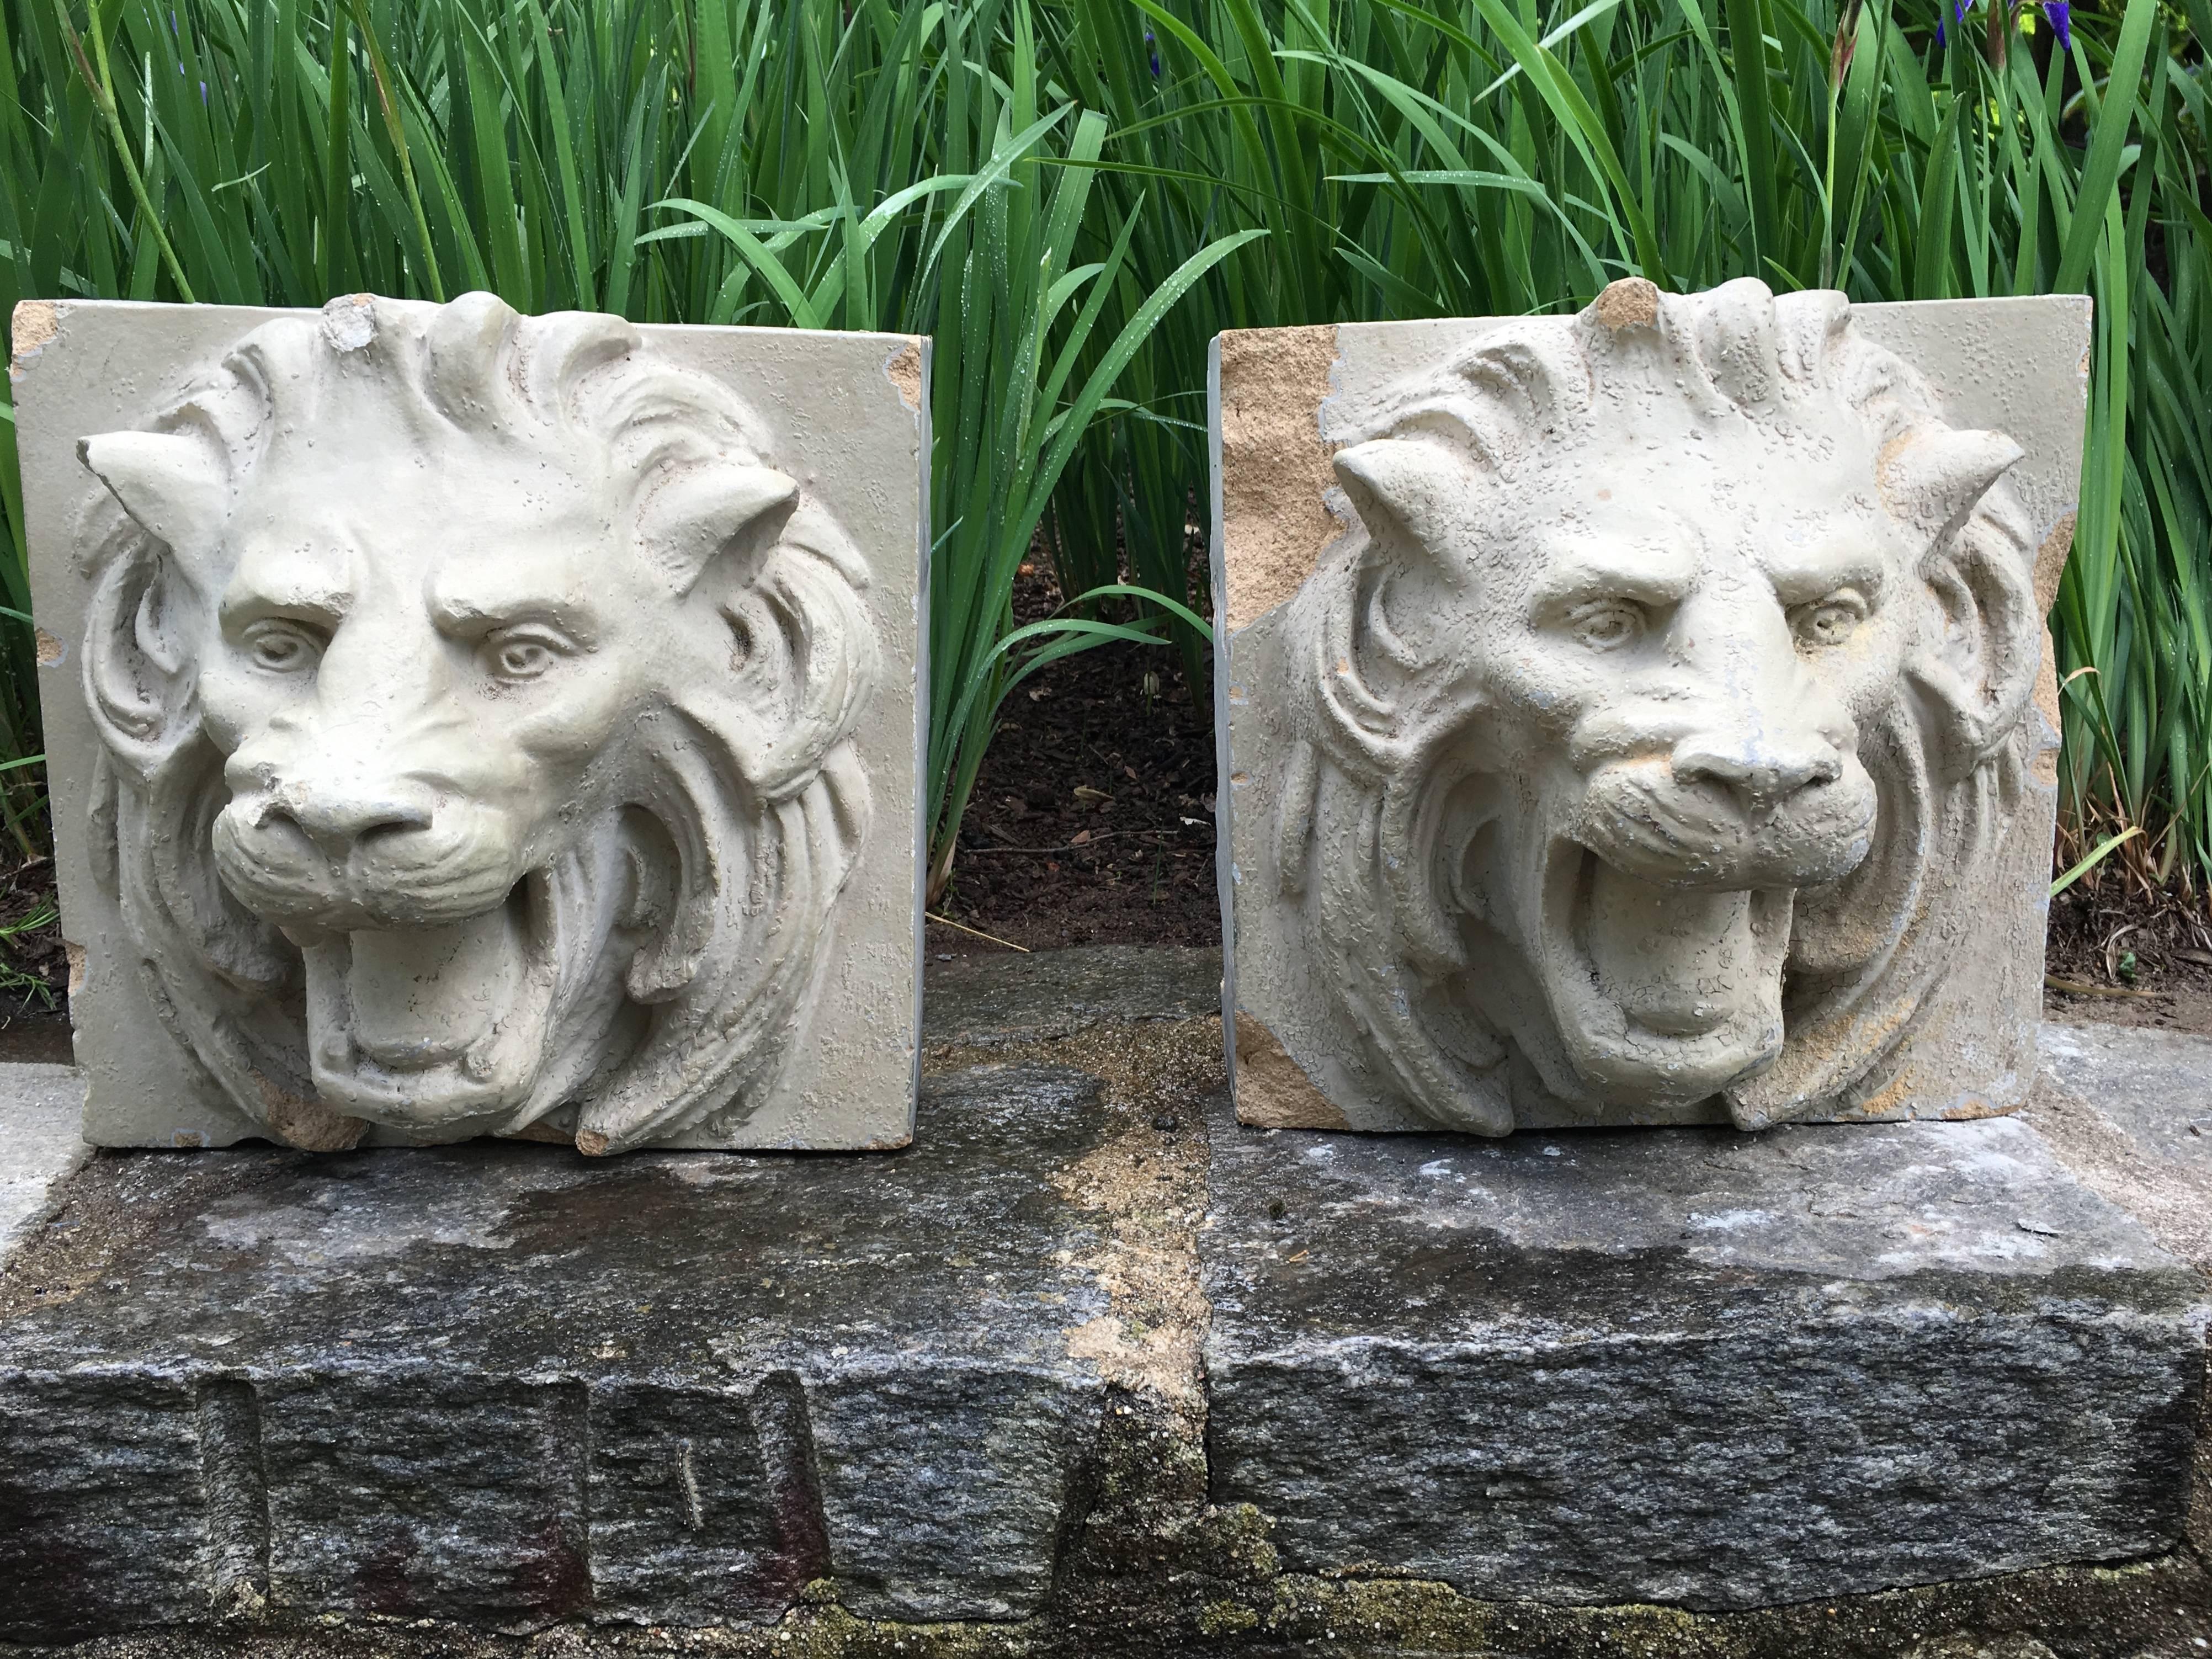 This decorative pair of glazed stoneware lion heads originally graced the facade of a 19th century building, but we have drilled them to operate as fountain masks. Hung above your wall fountain or emptying into a stone trough they add a classical